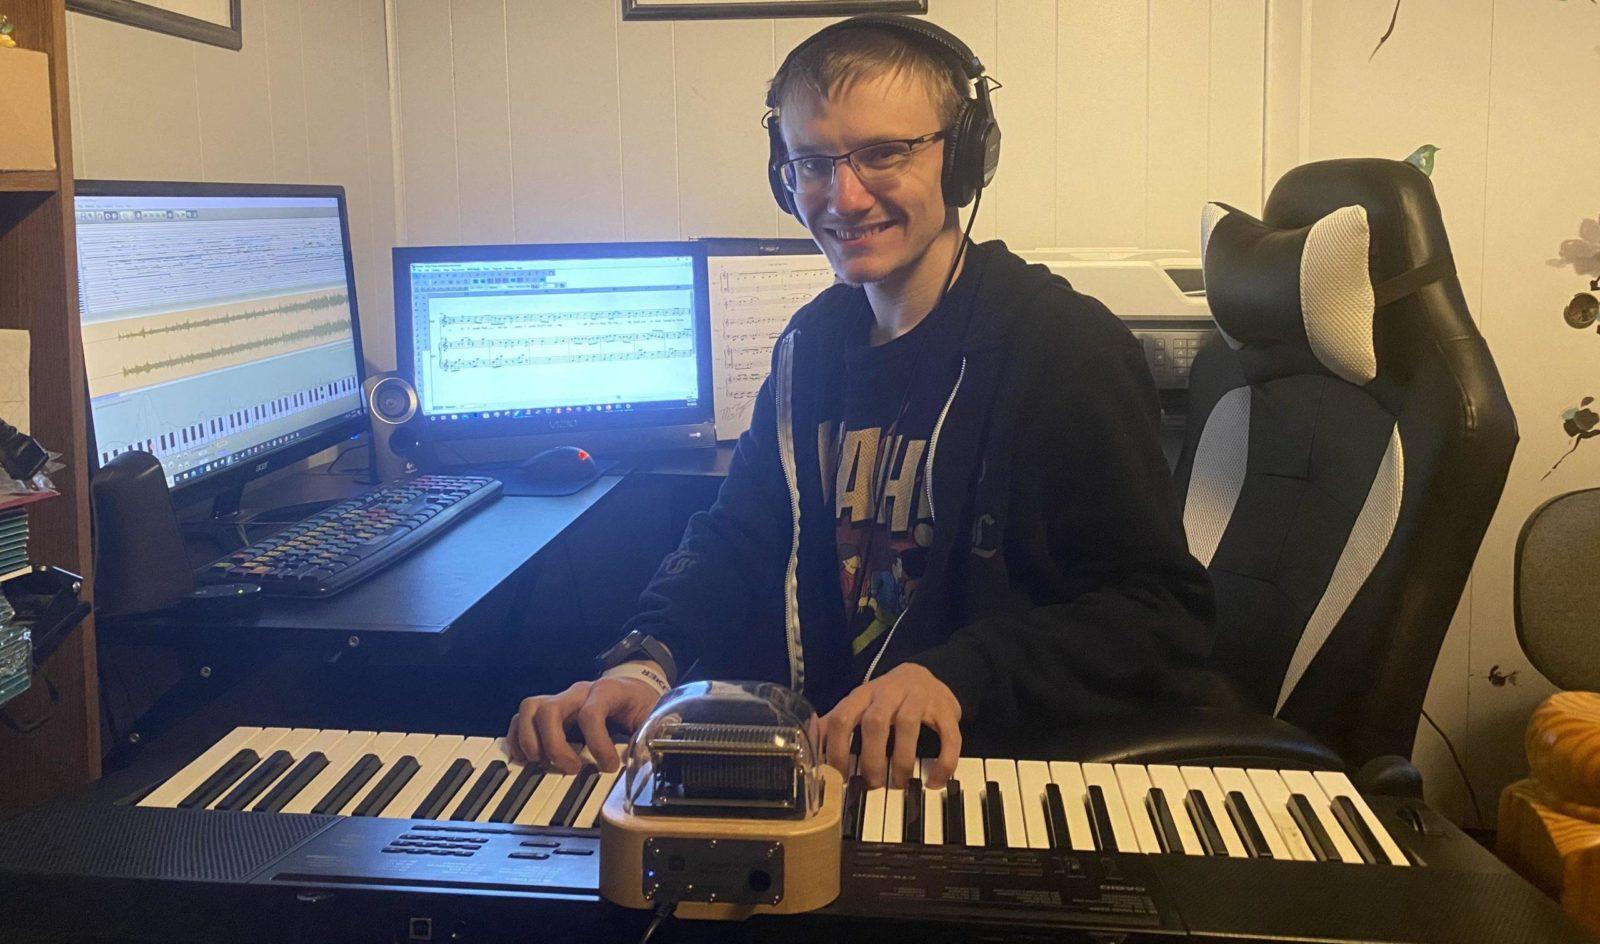 Josh Keeler is playing the Muro Box in his studio. and there are a MIDI keyboard and computer next to the Music Box.